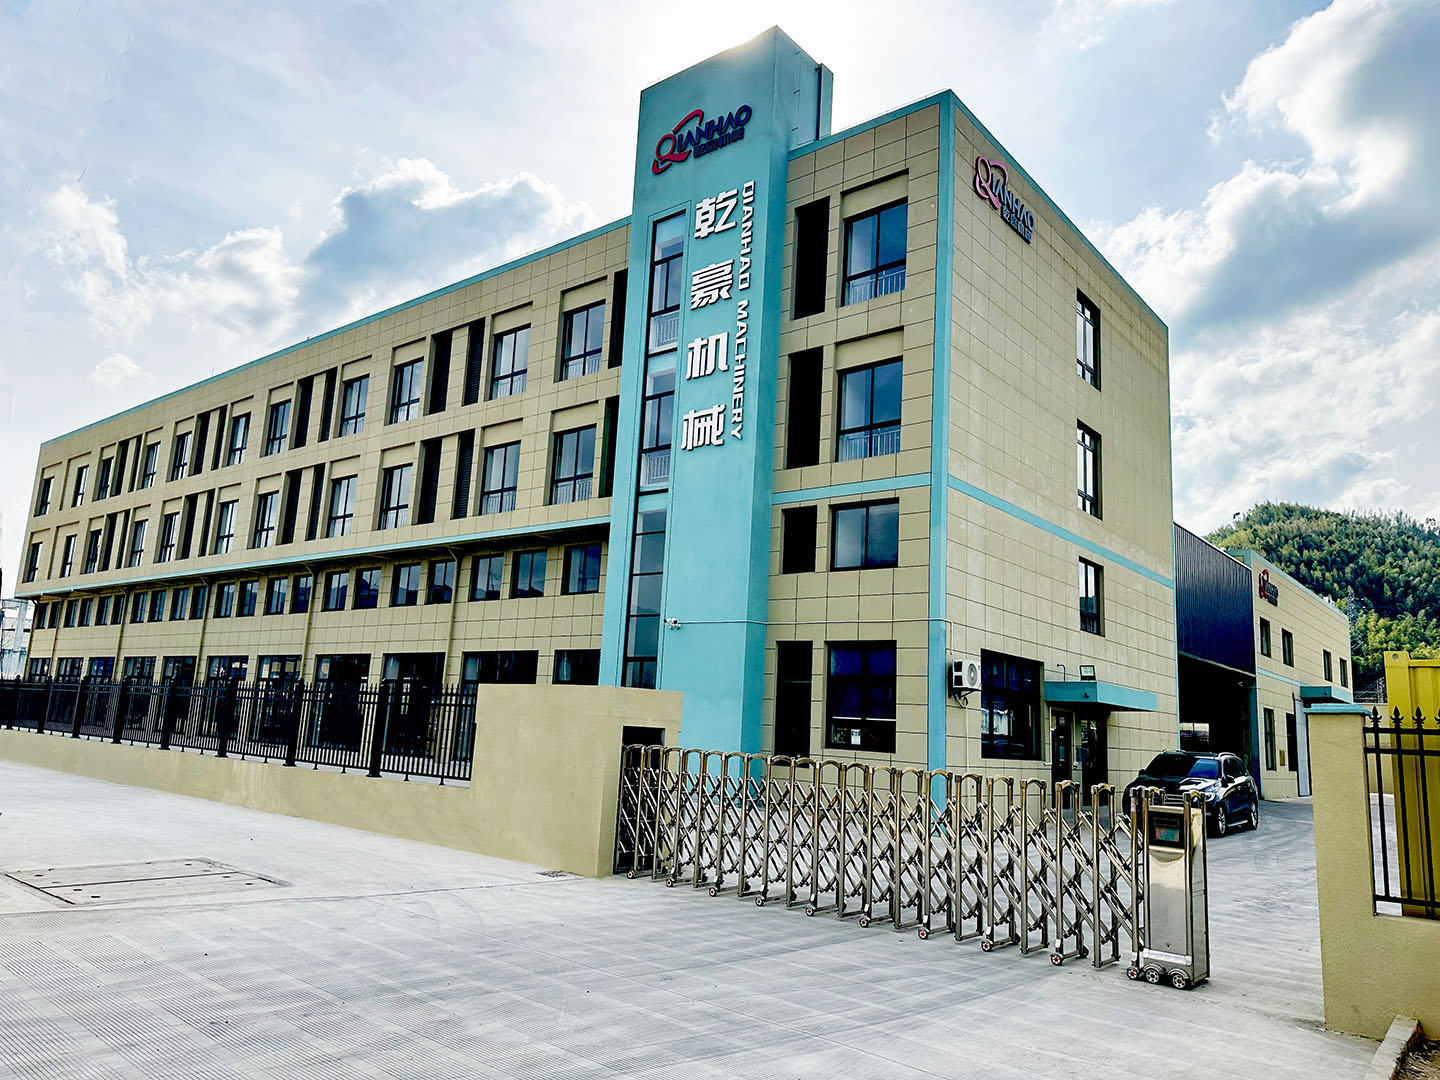  Qianhao has its own in-house sheet metal production facility